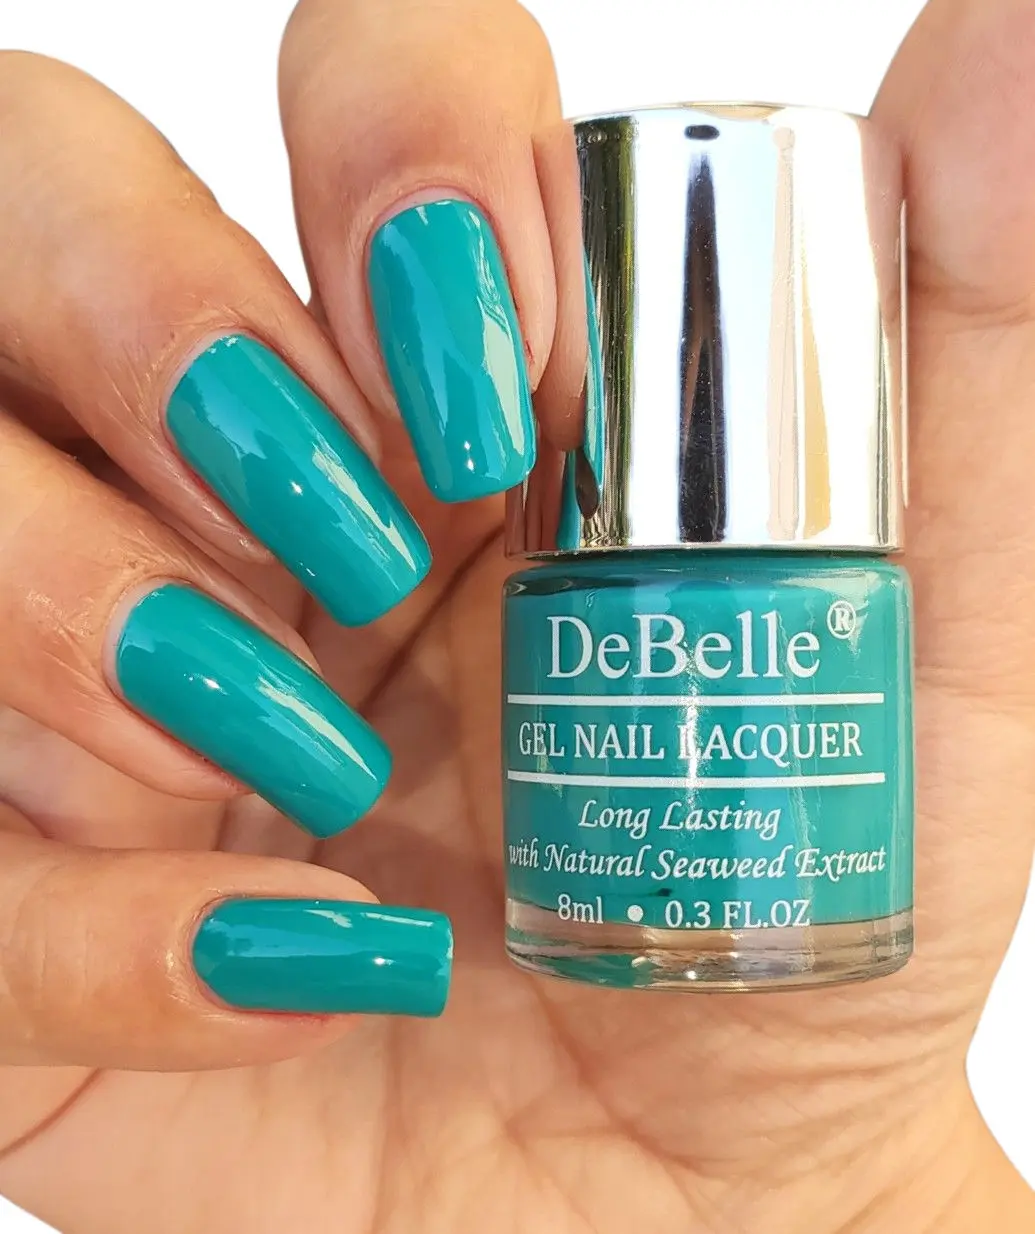 DeBelle Gel Nail Lacquer Creme Royale Cocktail - Turquoise Blue, (8 ml)